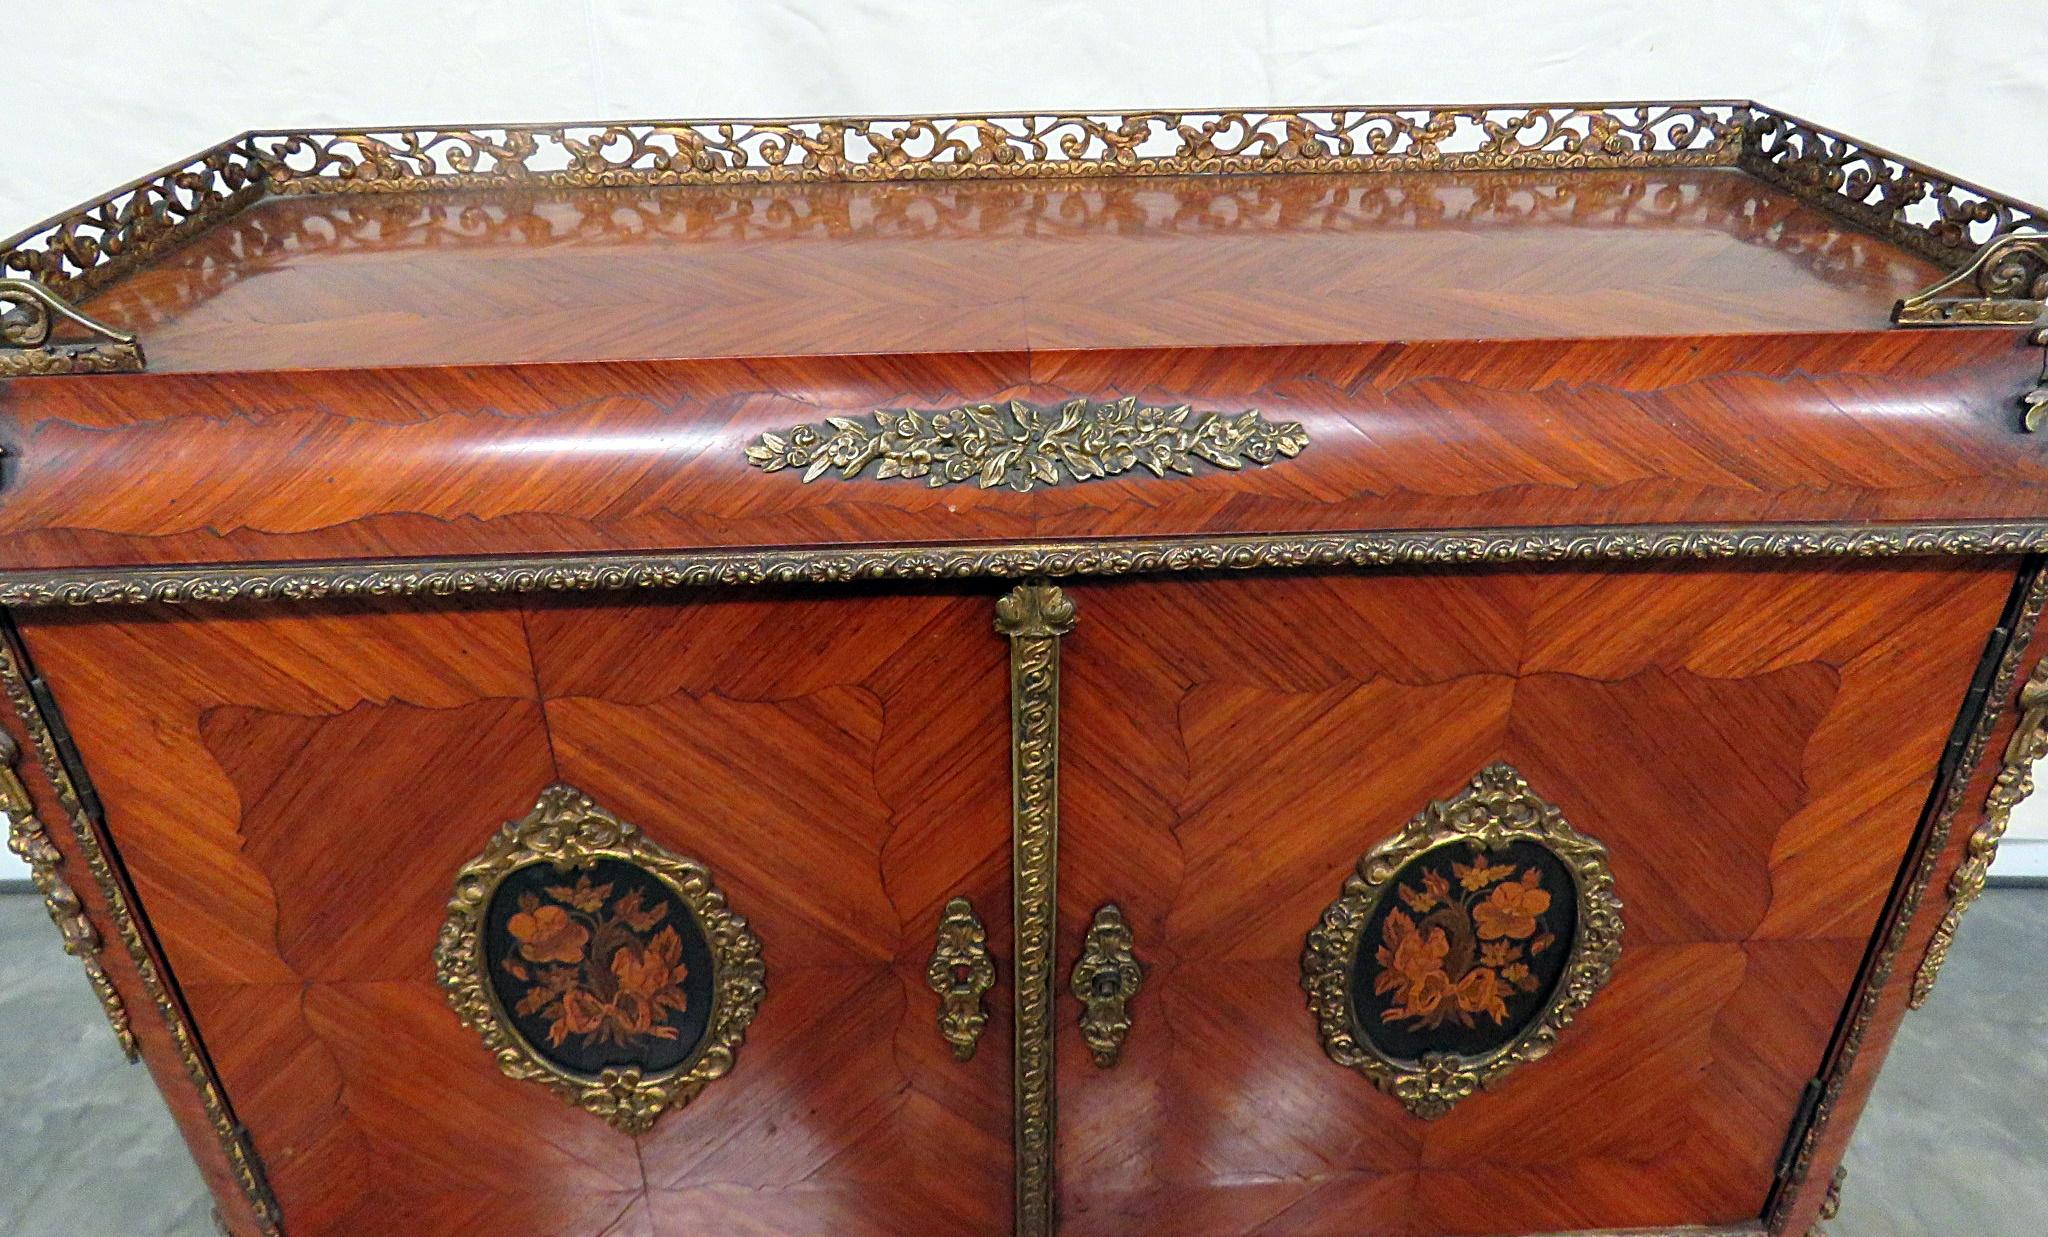 20th Century Antique C1870s French Louis XVI Style Inlaid King Wood Ladies Writing Desk